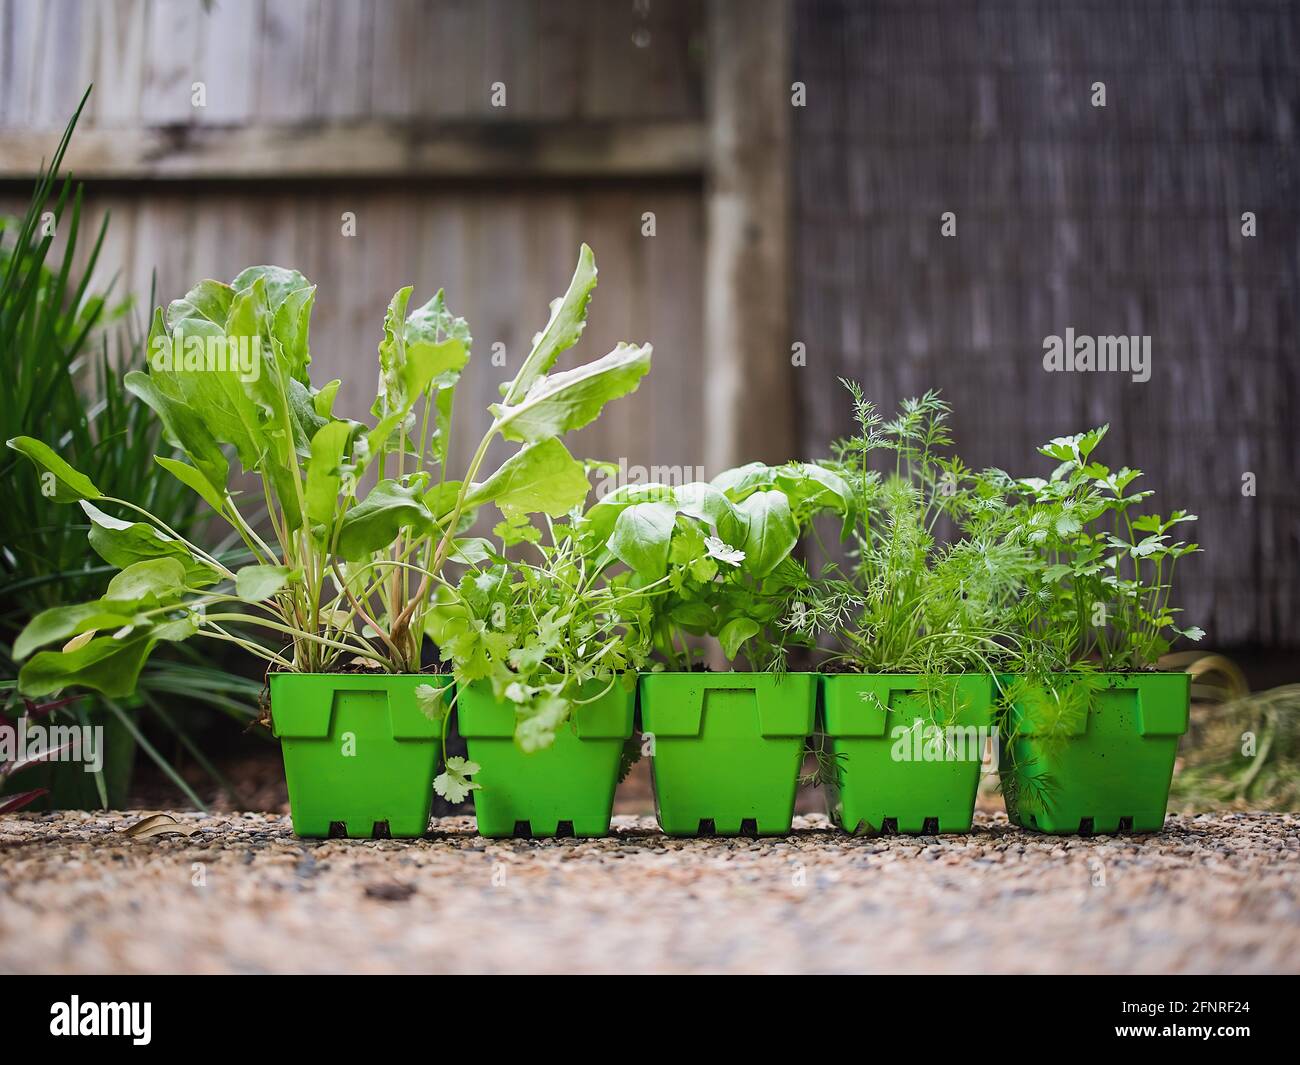 Variety of fresh green potted culinary herbs in green plastic pots ready to plant outdoors in a backyard garden Stock Photo